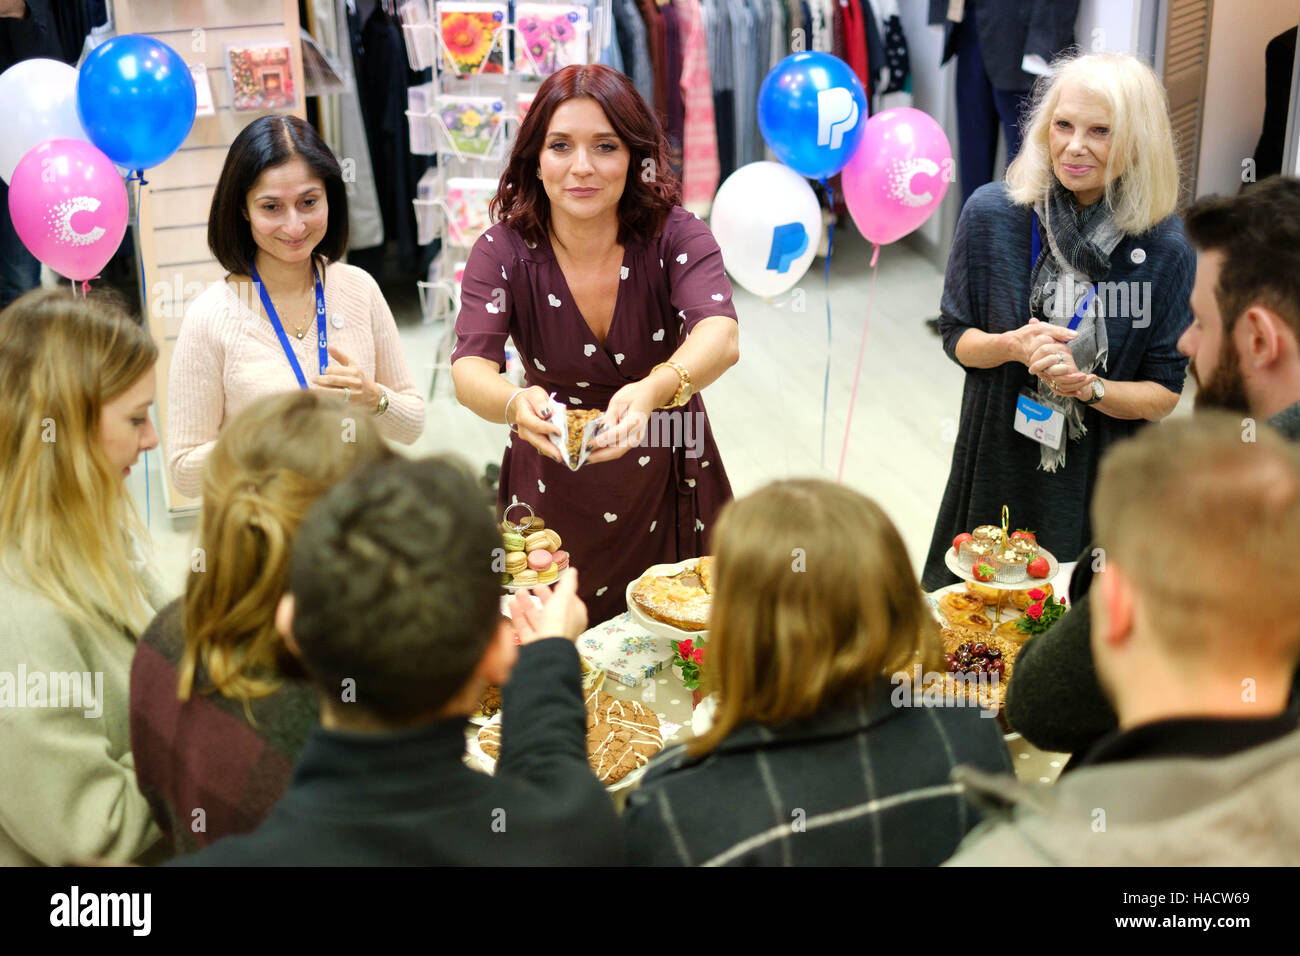 EDITORIAL USE ONLY Candice Brown (centre), winner of the Great British Bake Off, surprises customers at a charity bake sale to celebrate Giving Tuesday, which is an alternative to Black Friday with people around the world being encouraged to do a good deed for charity. Stock Photo